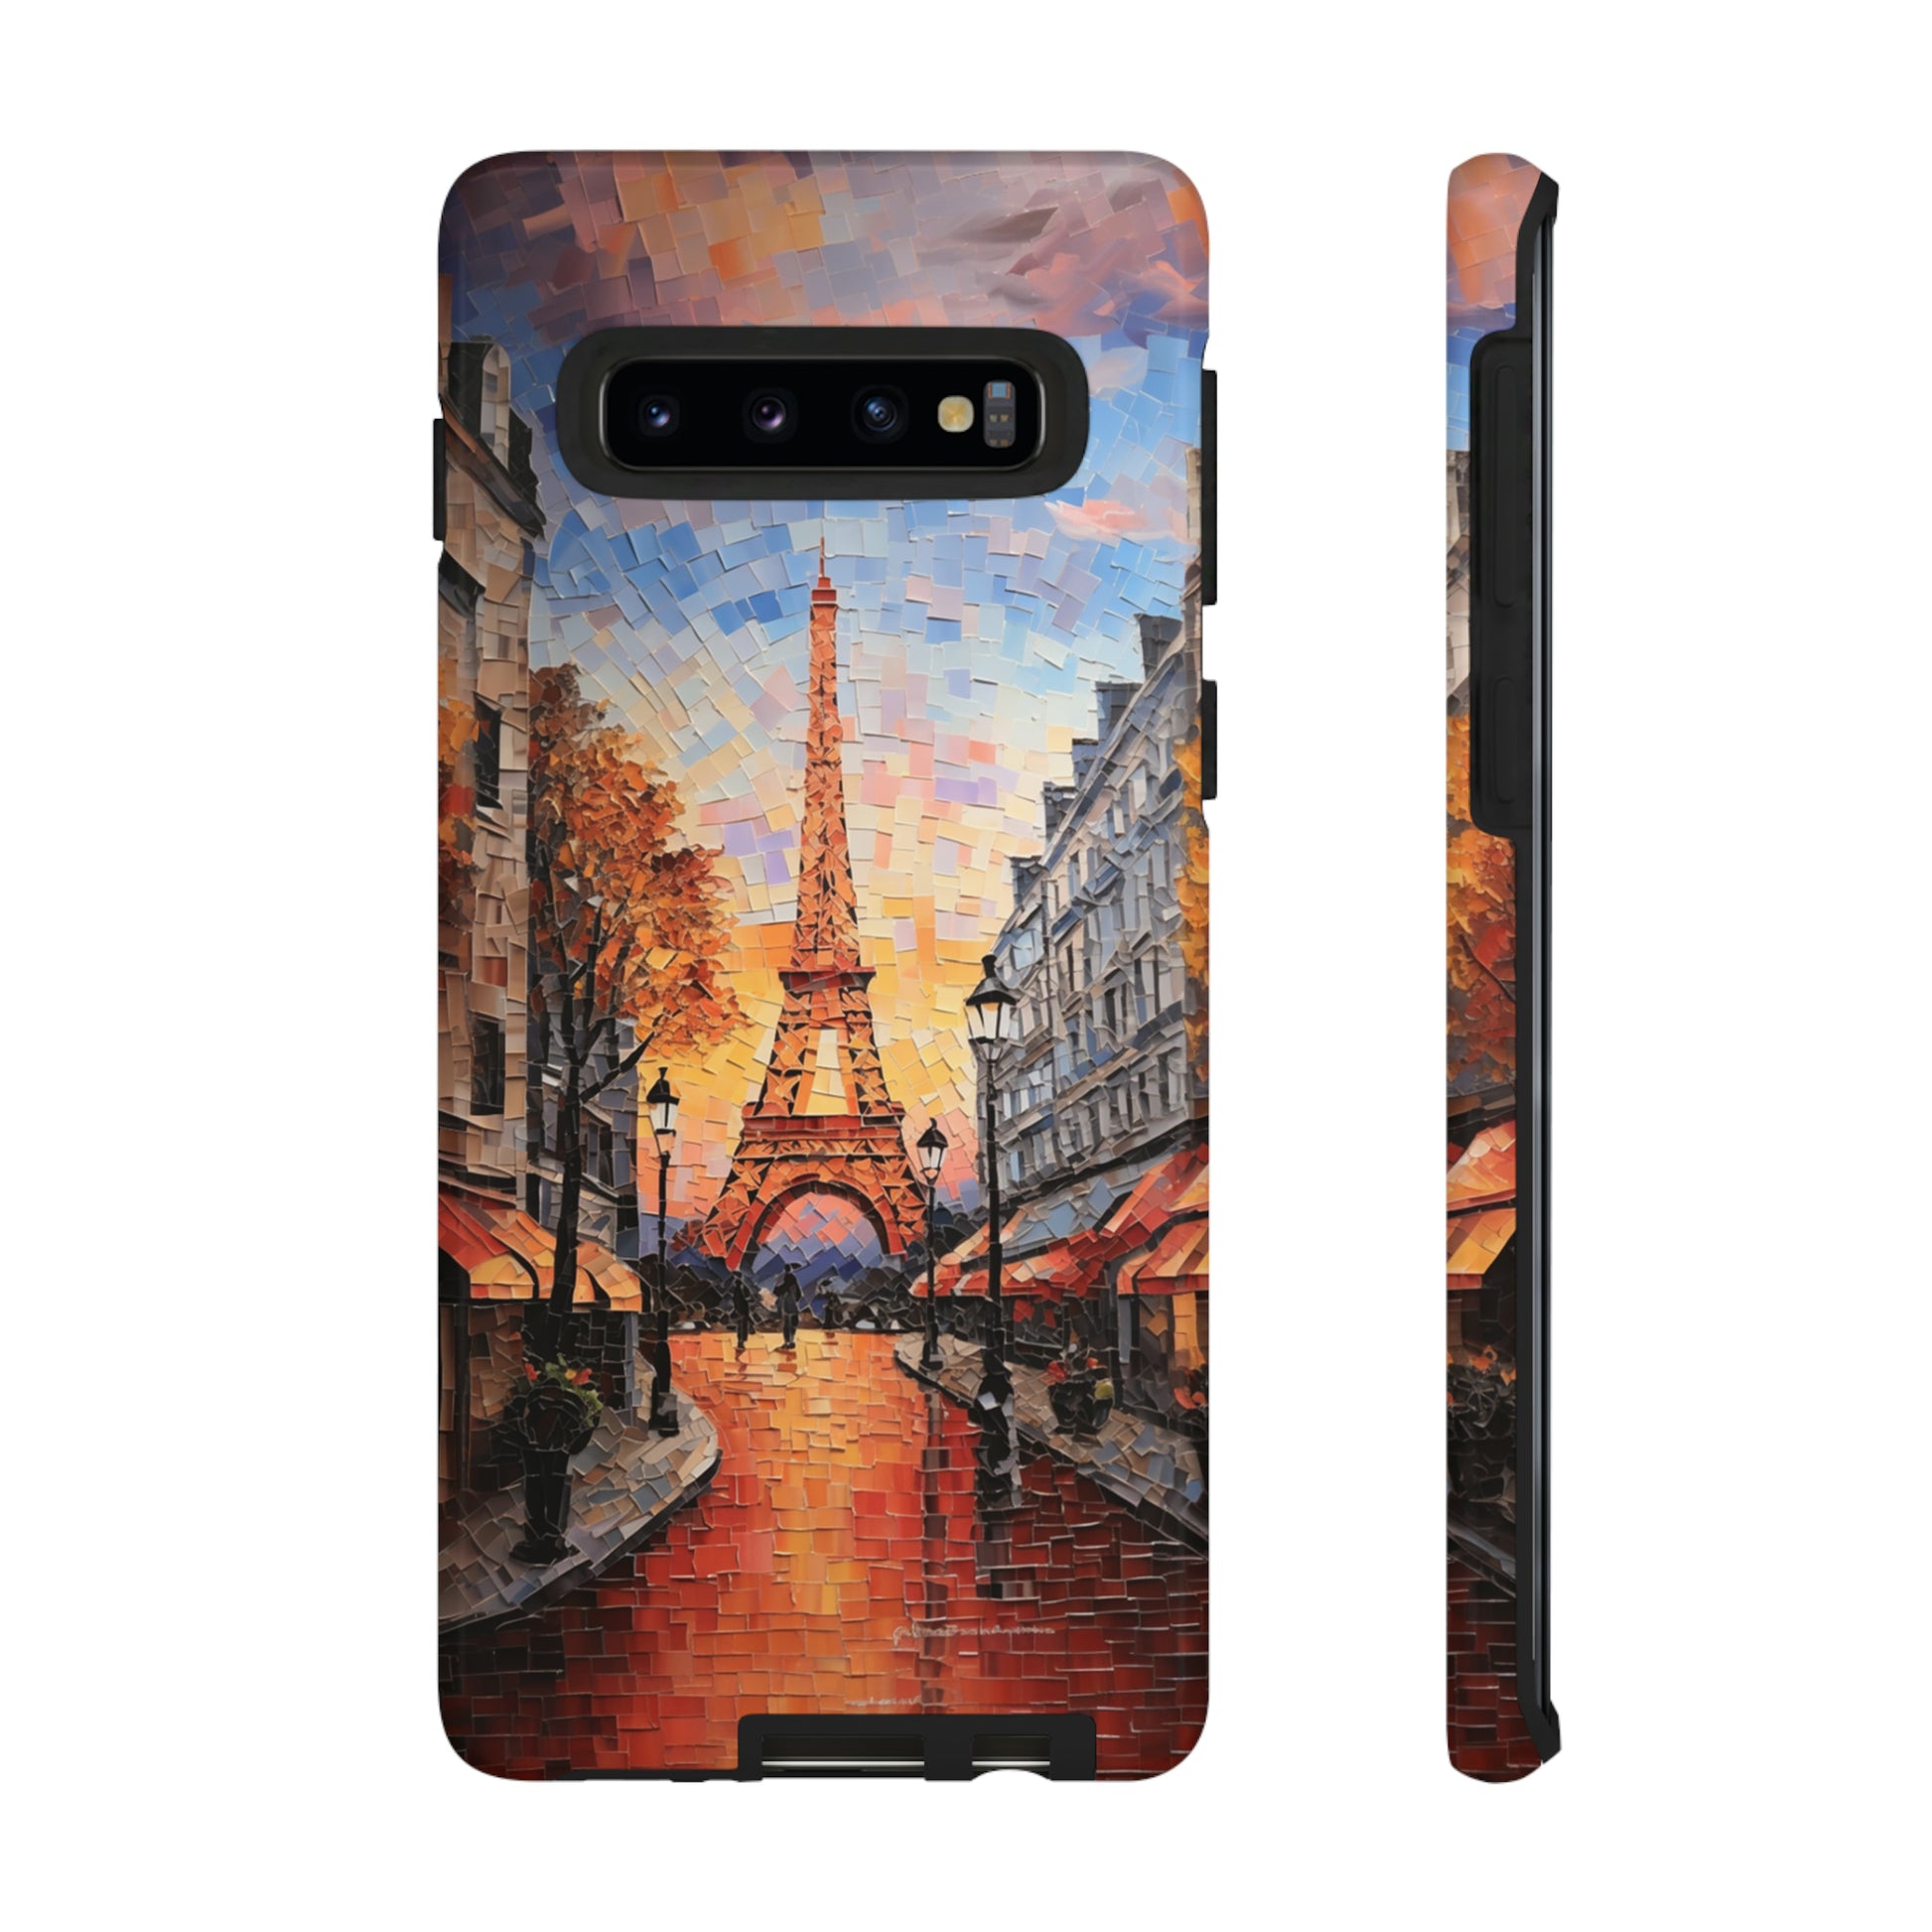 French phone case